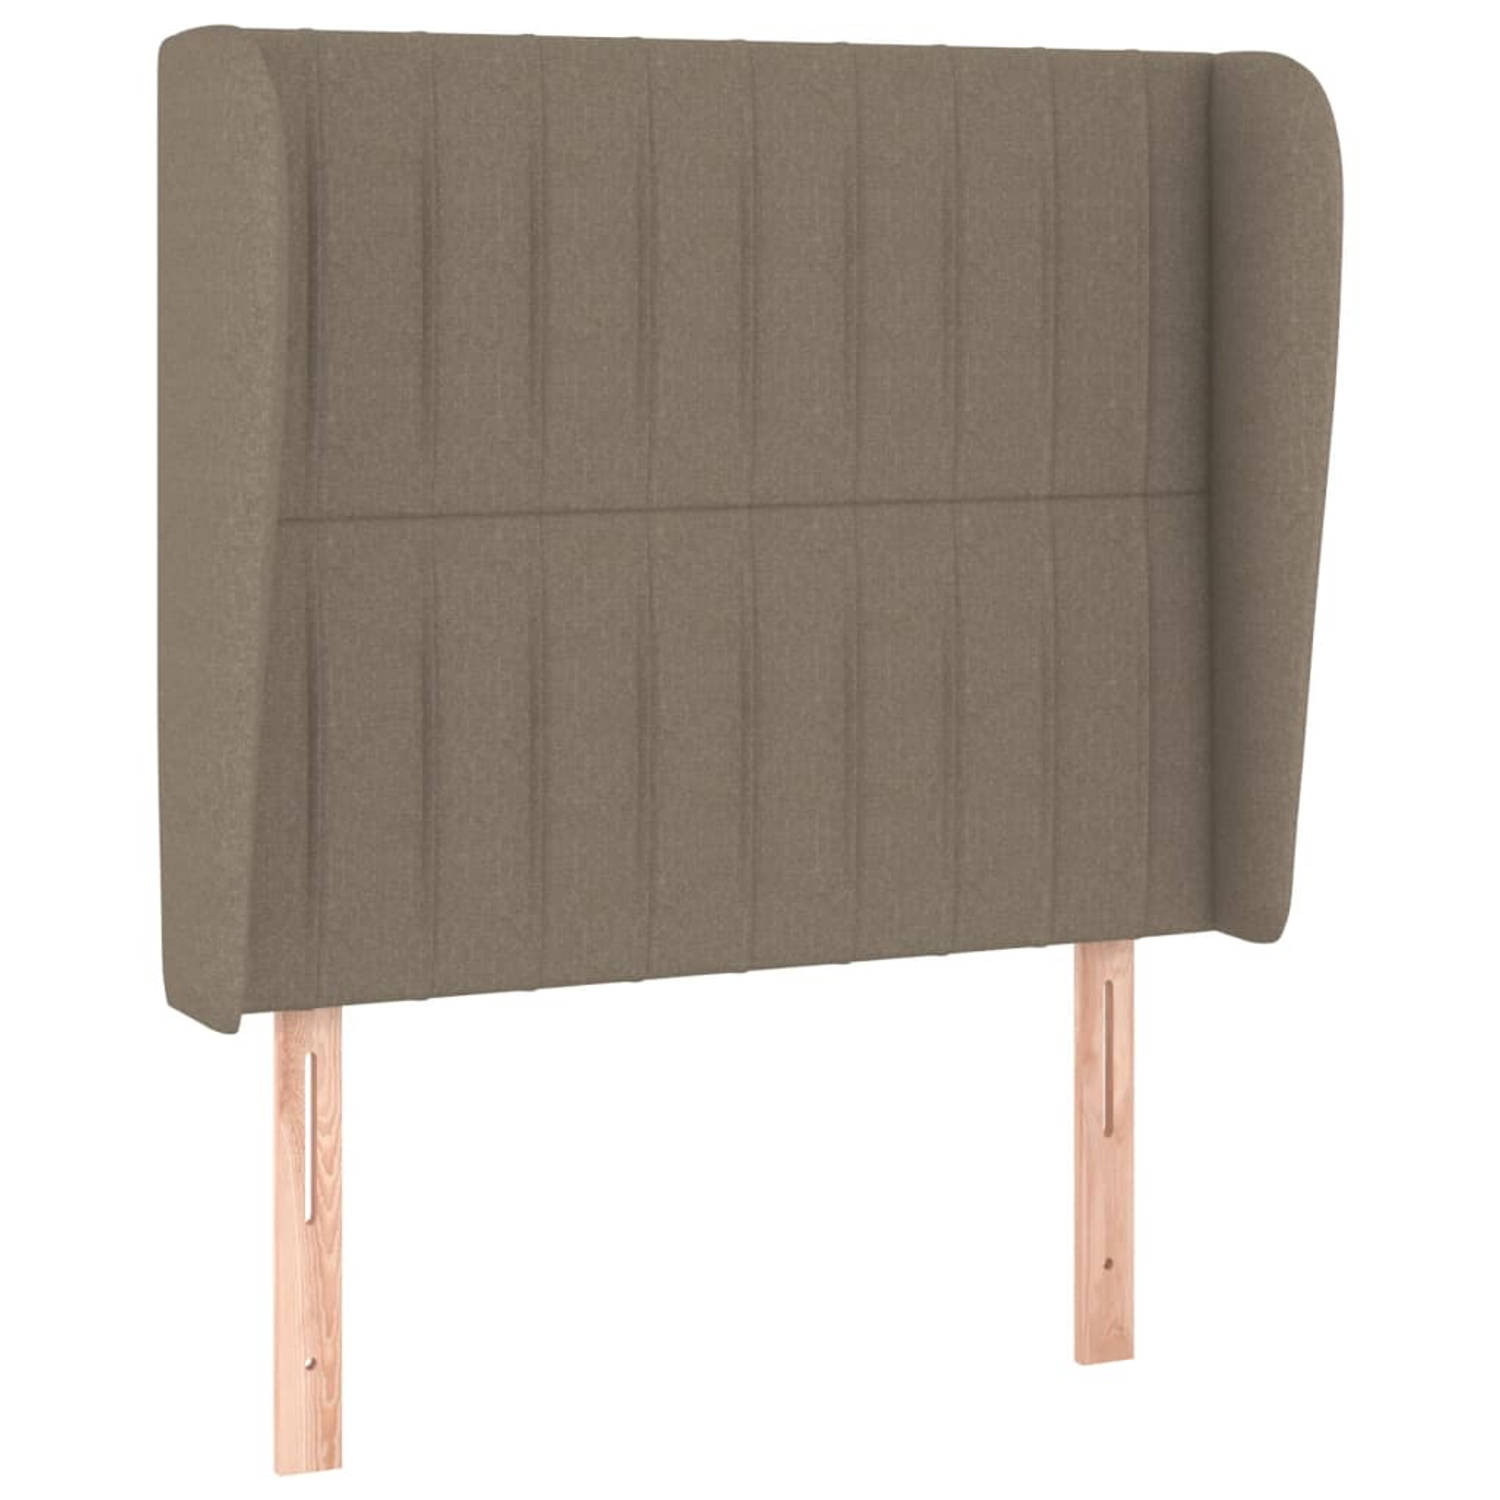 The Living Store Hoofdeind Bedombouw - 83x23x118/128 cm - Taupe